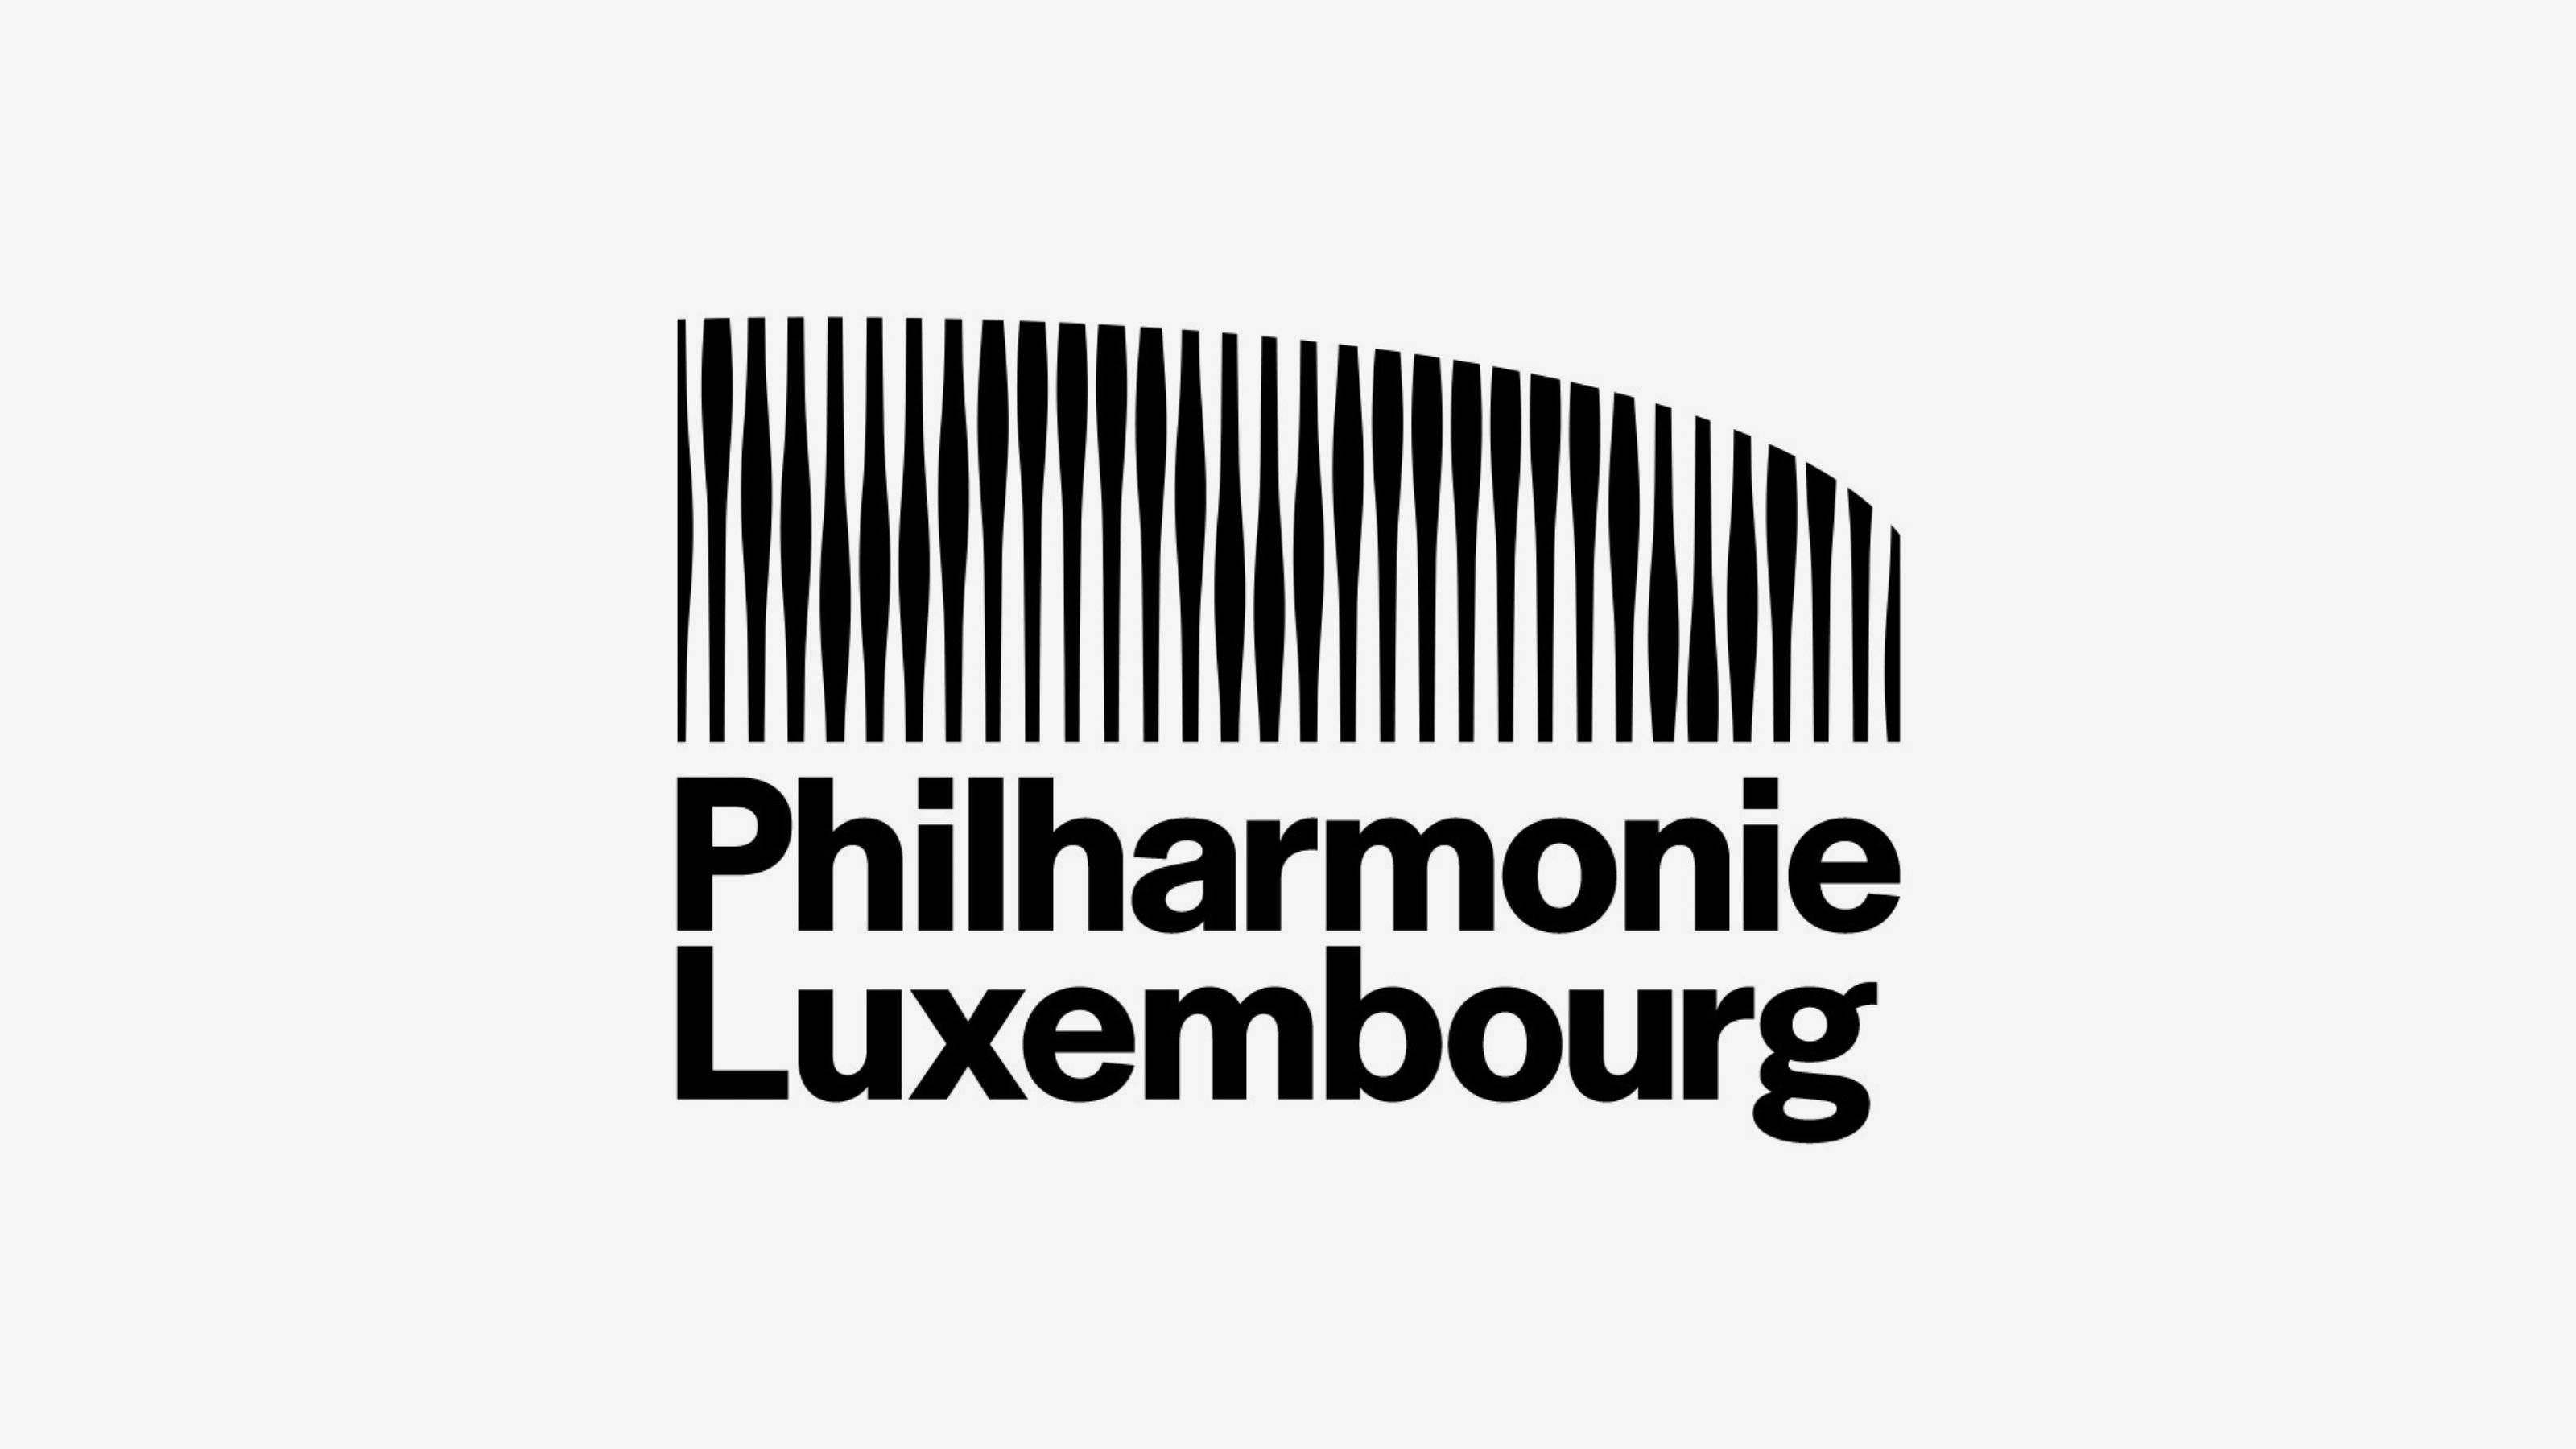 Motion branding, dynamic logo and visual identity for Philharmonie Luxembourg designed by London-based NB Studio